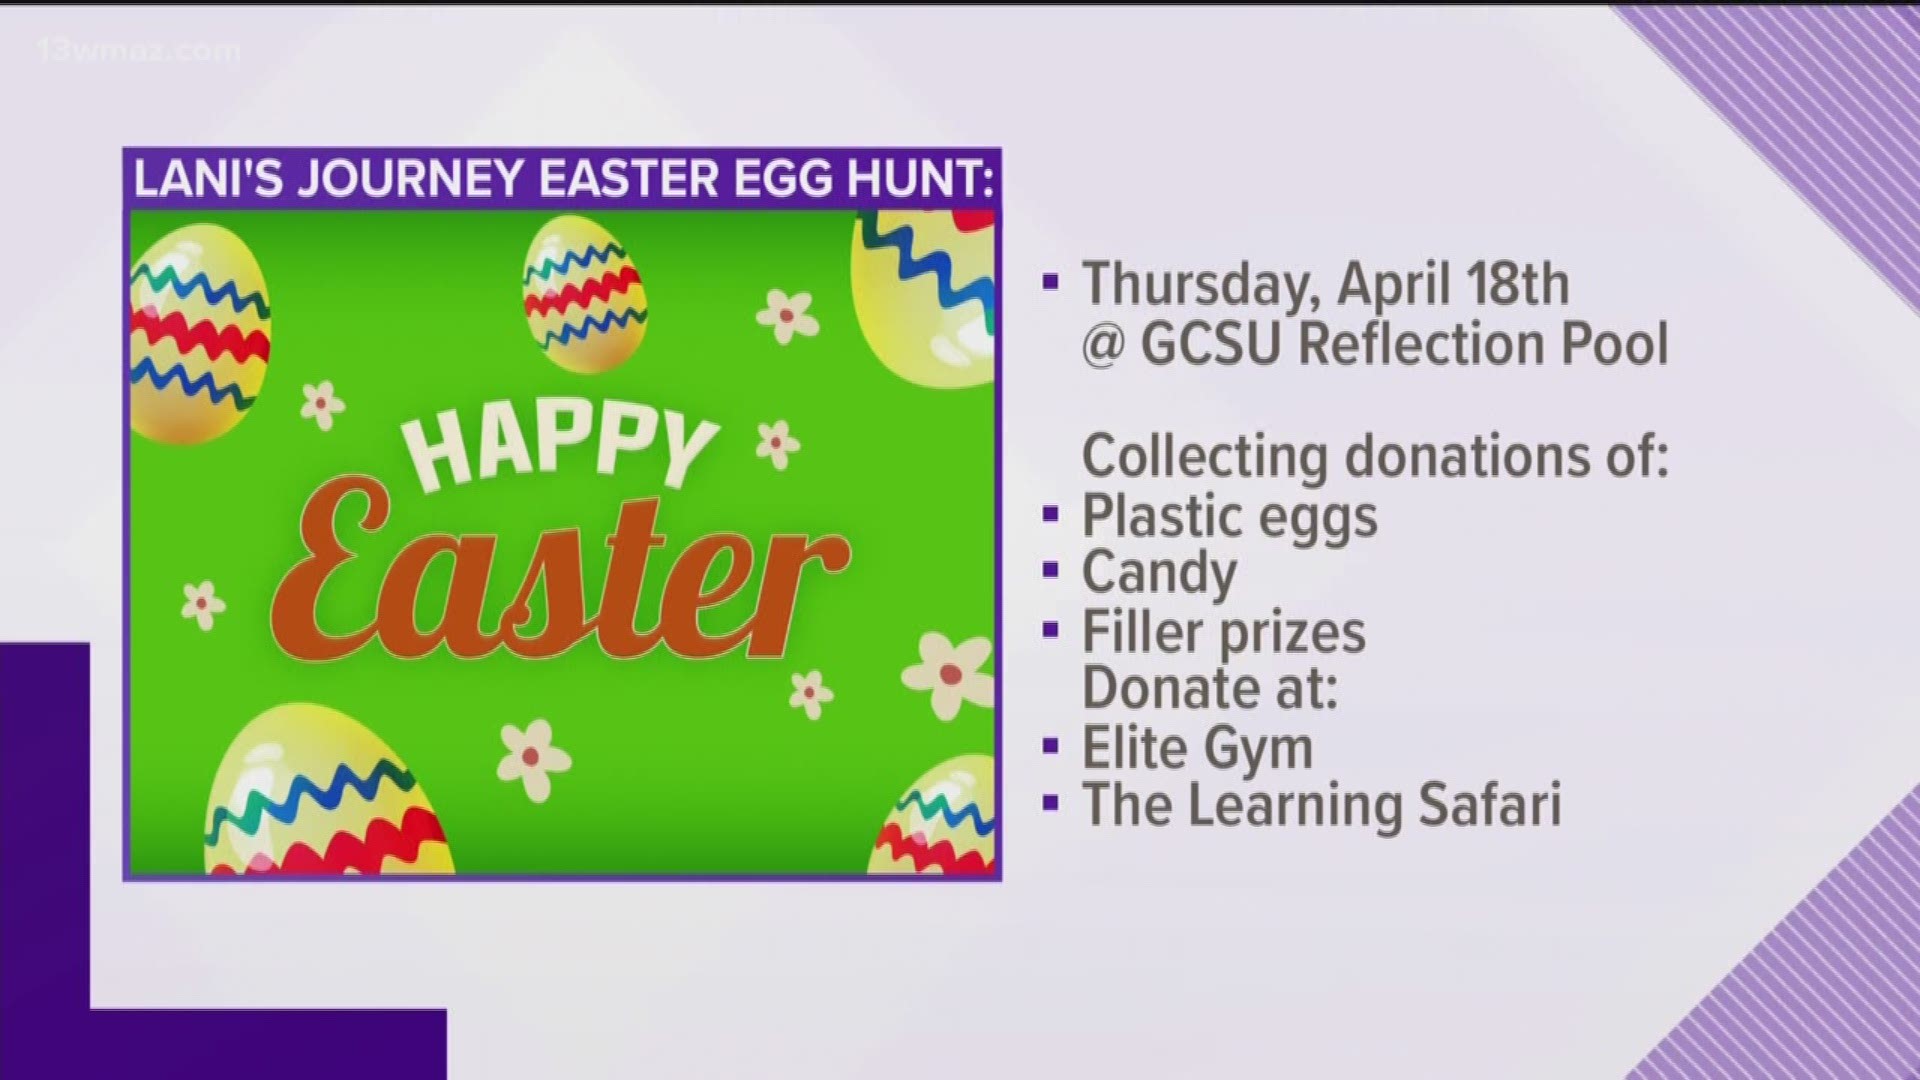 The organization wants to make sure the hunt is all-inclusive for kids with disabilities. It'll take place on Thursday at 6:30 p.m. at the Georgia College and State University Reflection Pool.